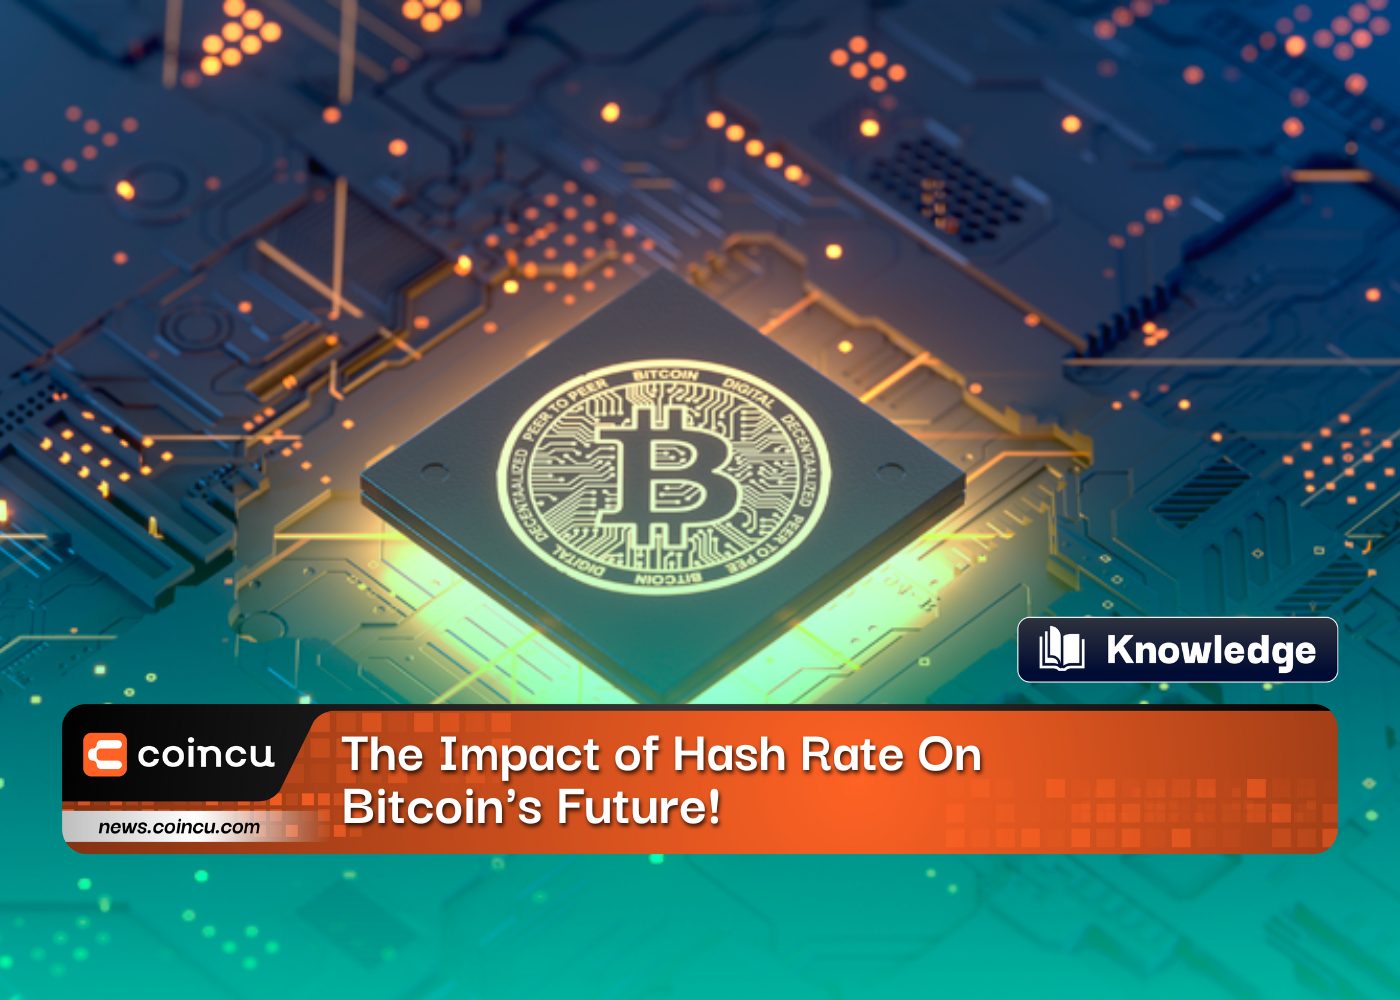 The Impact of Hash Rate On